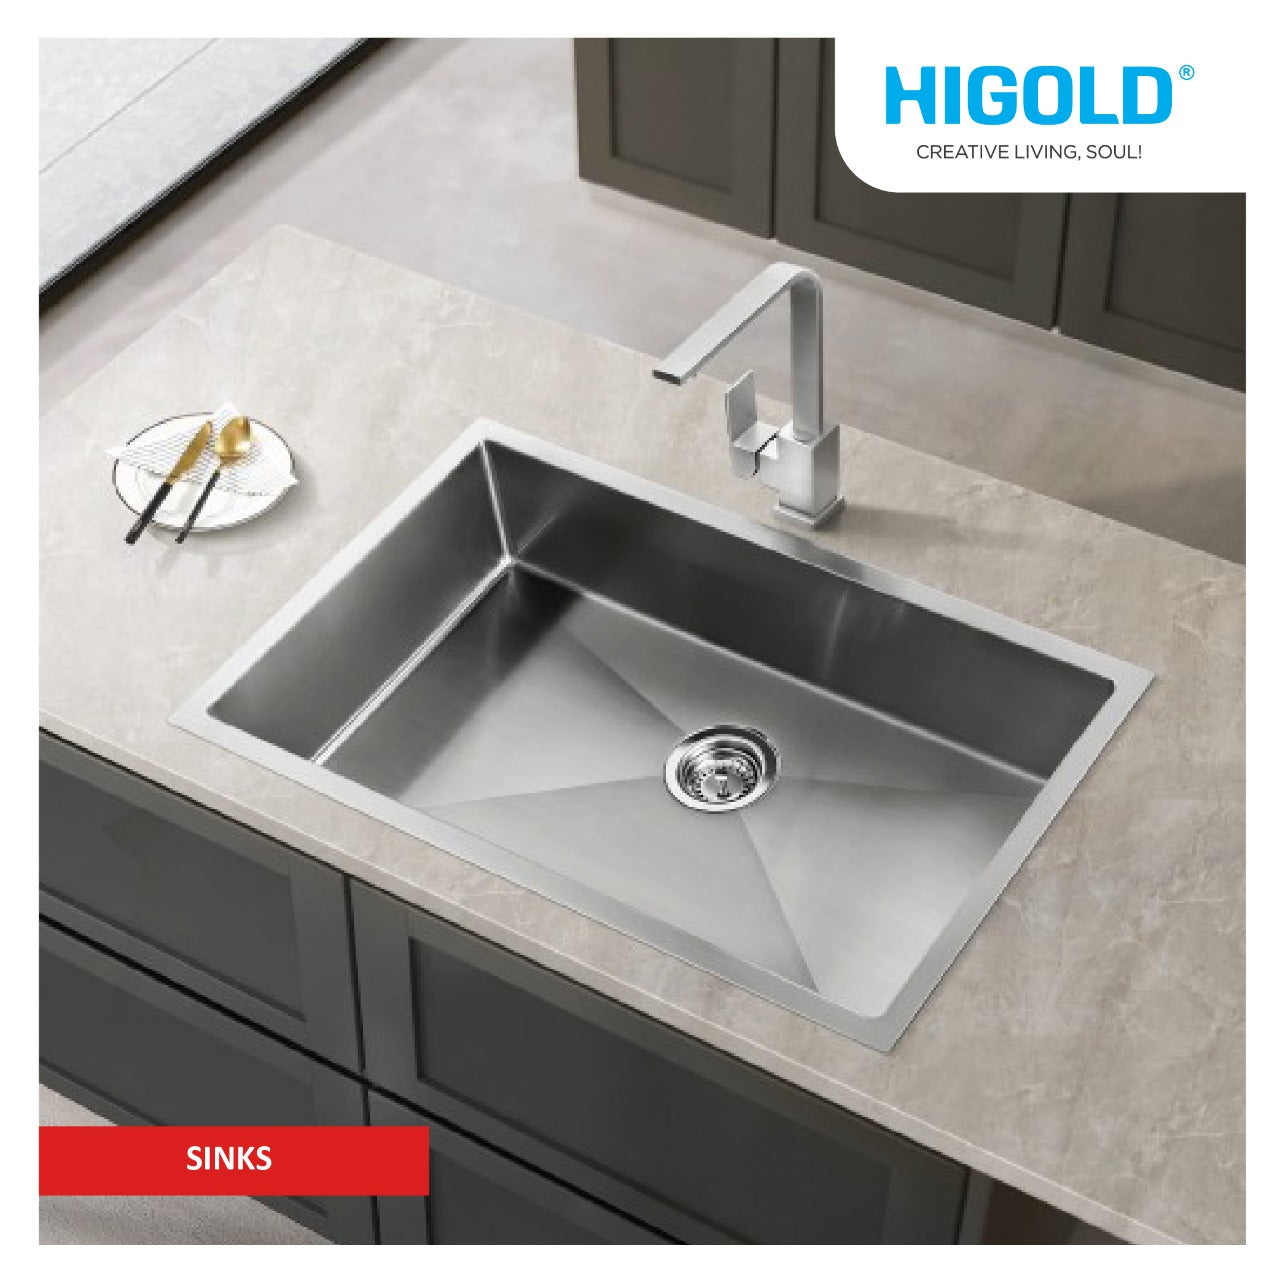 Higold Sinks - Kitchen Sink Collection by M. M. Noorbhoy & Co.